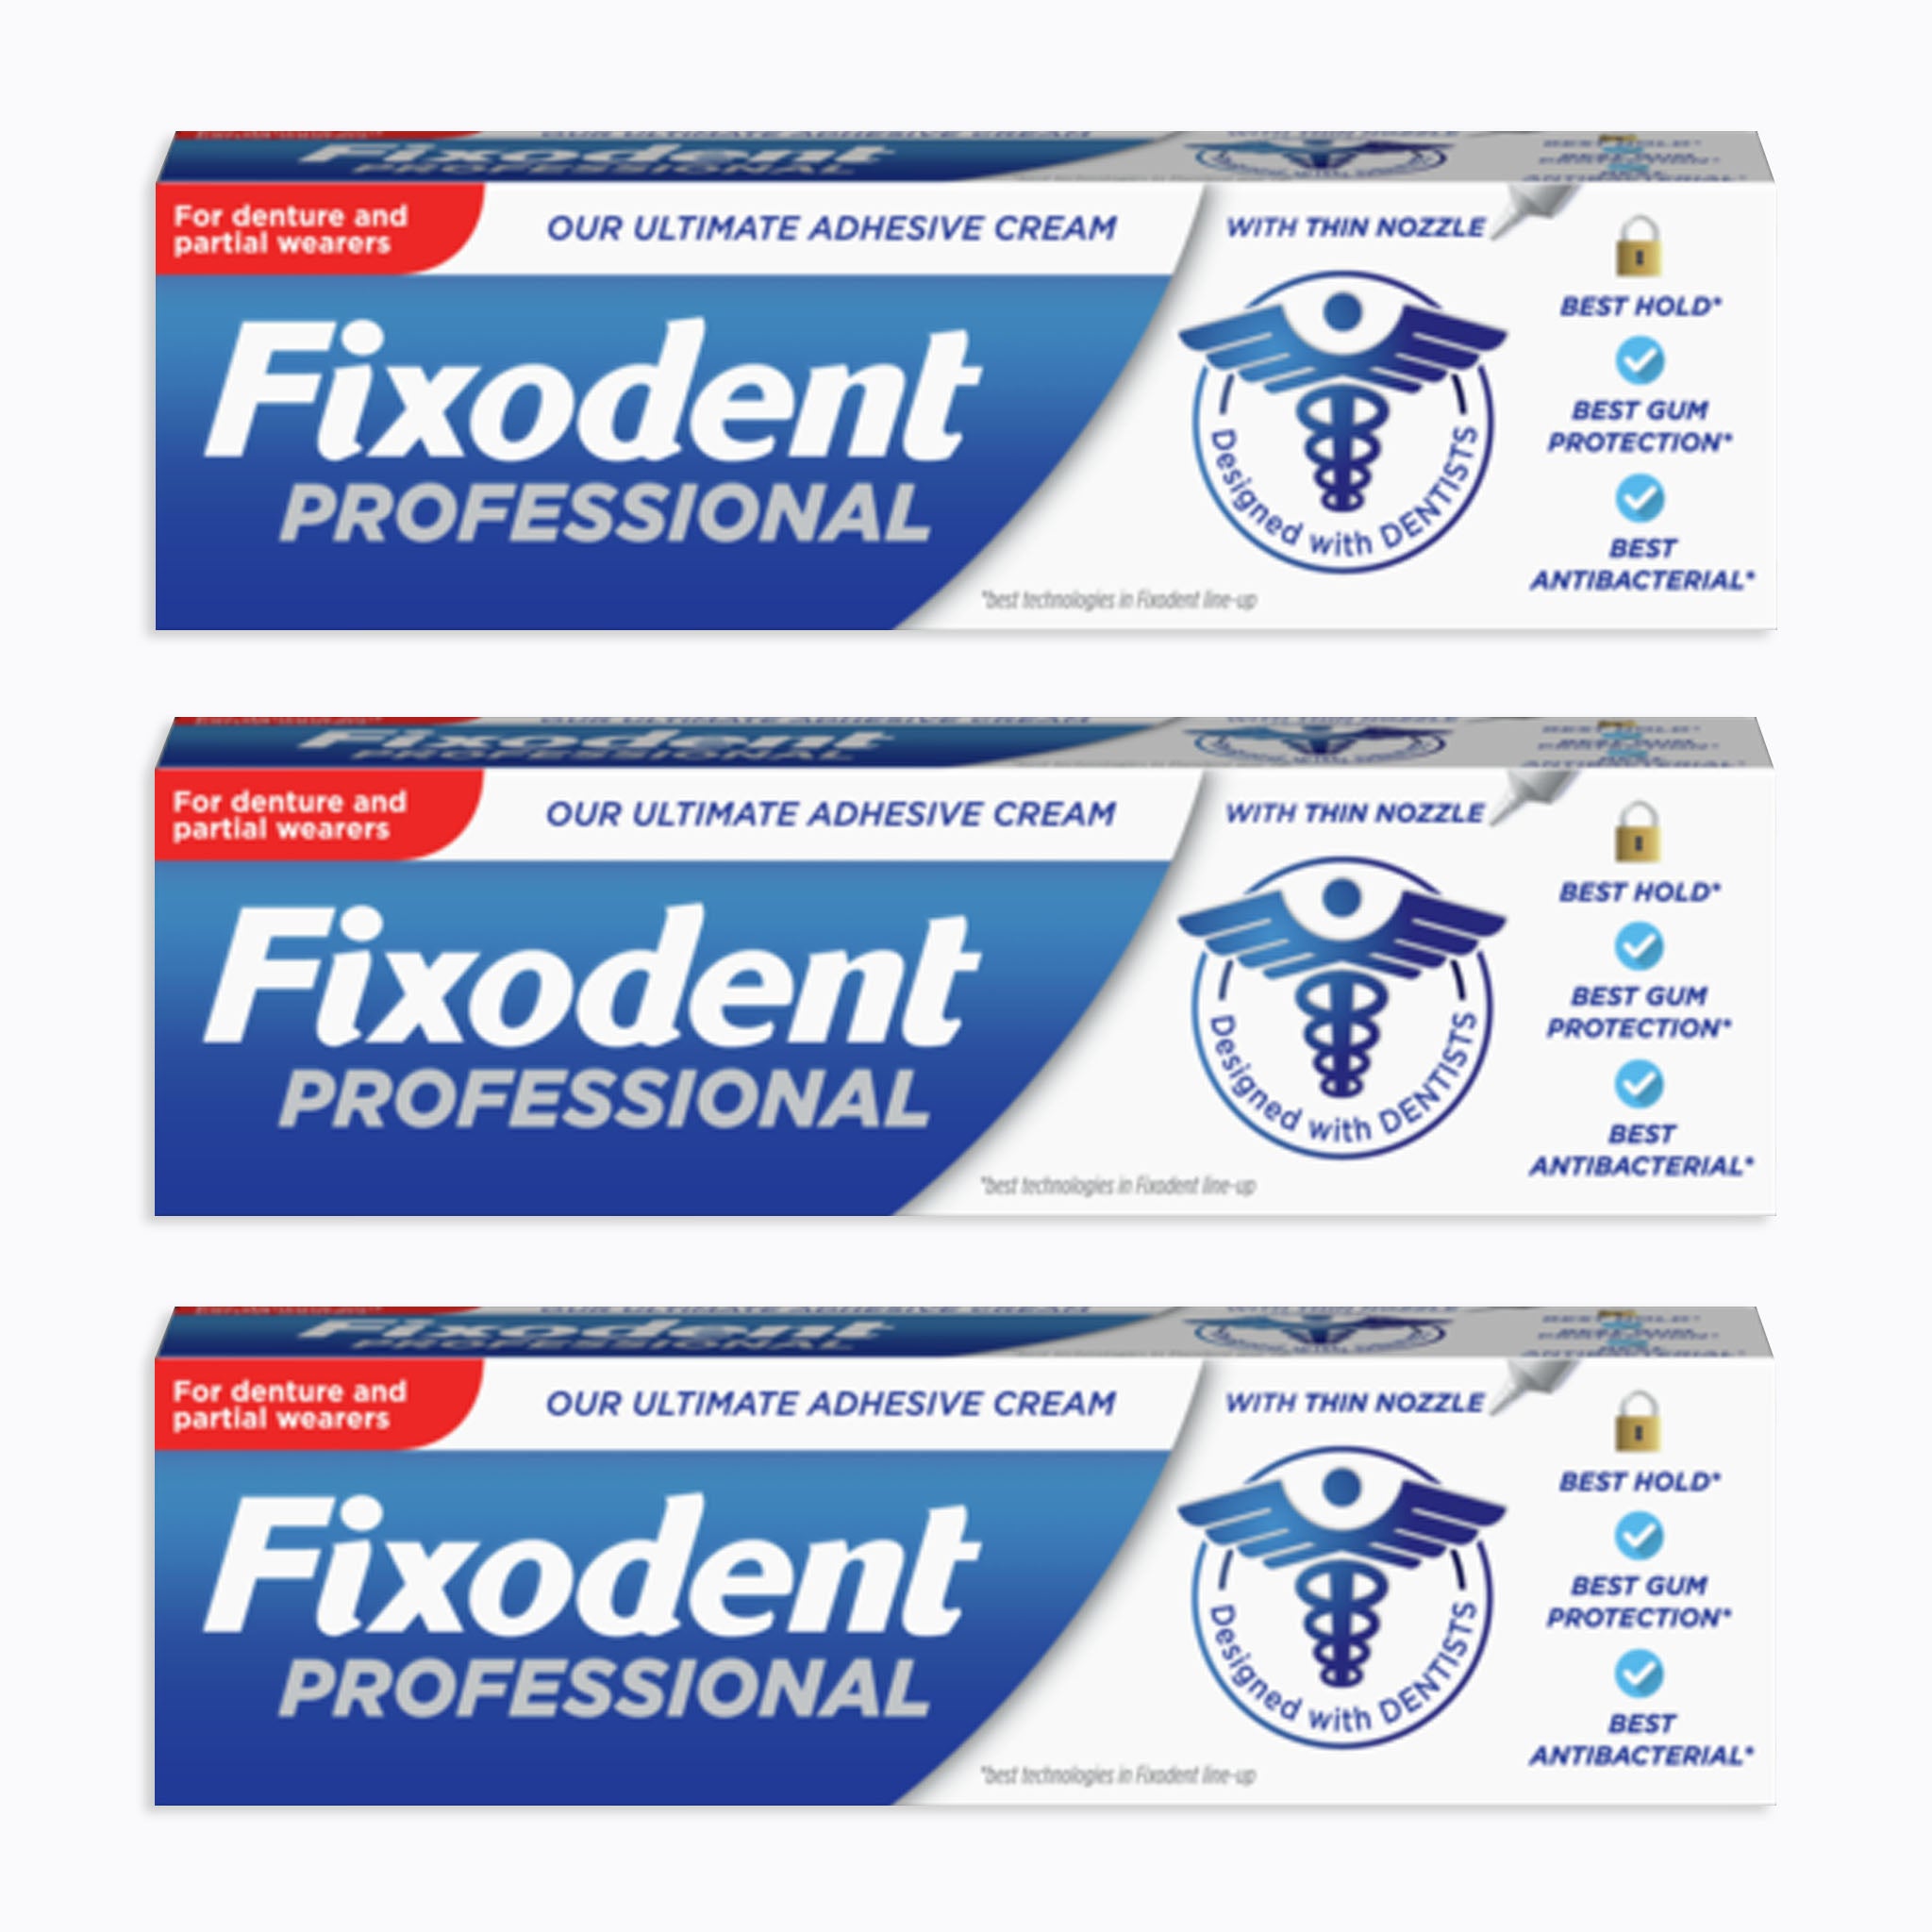 Fixodent Professional Ultimate Adhesive Cream (40g) - Multipack (Pack of 3)